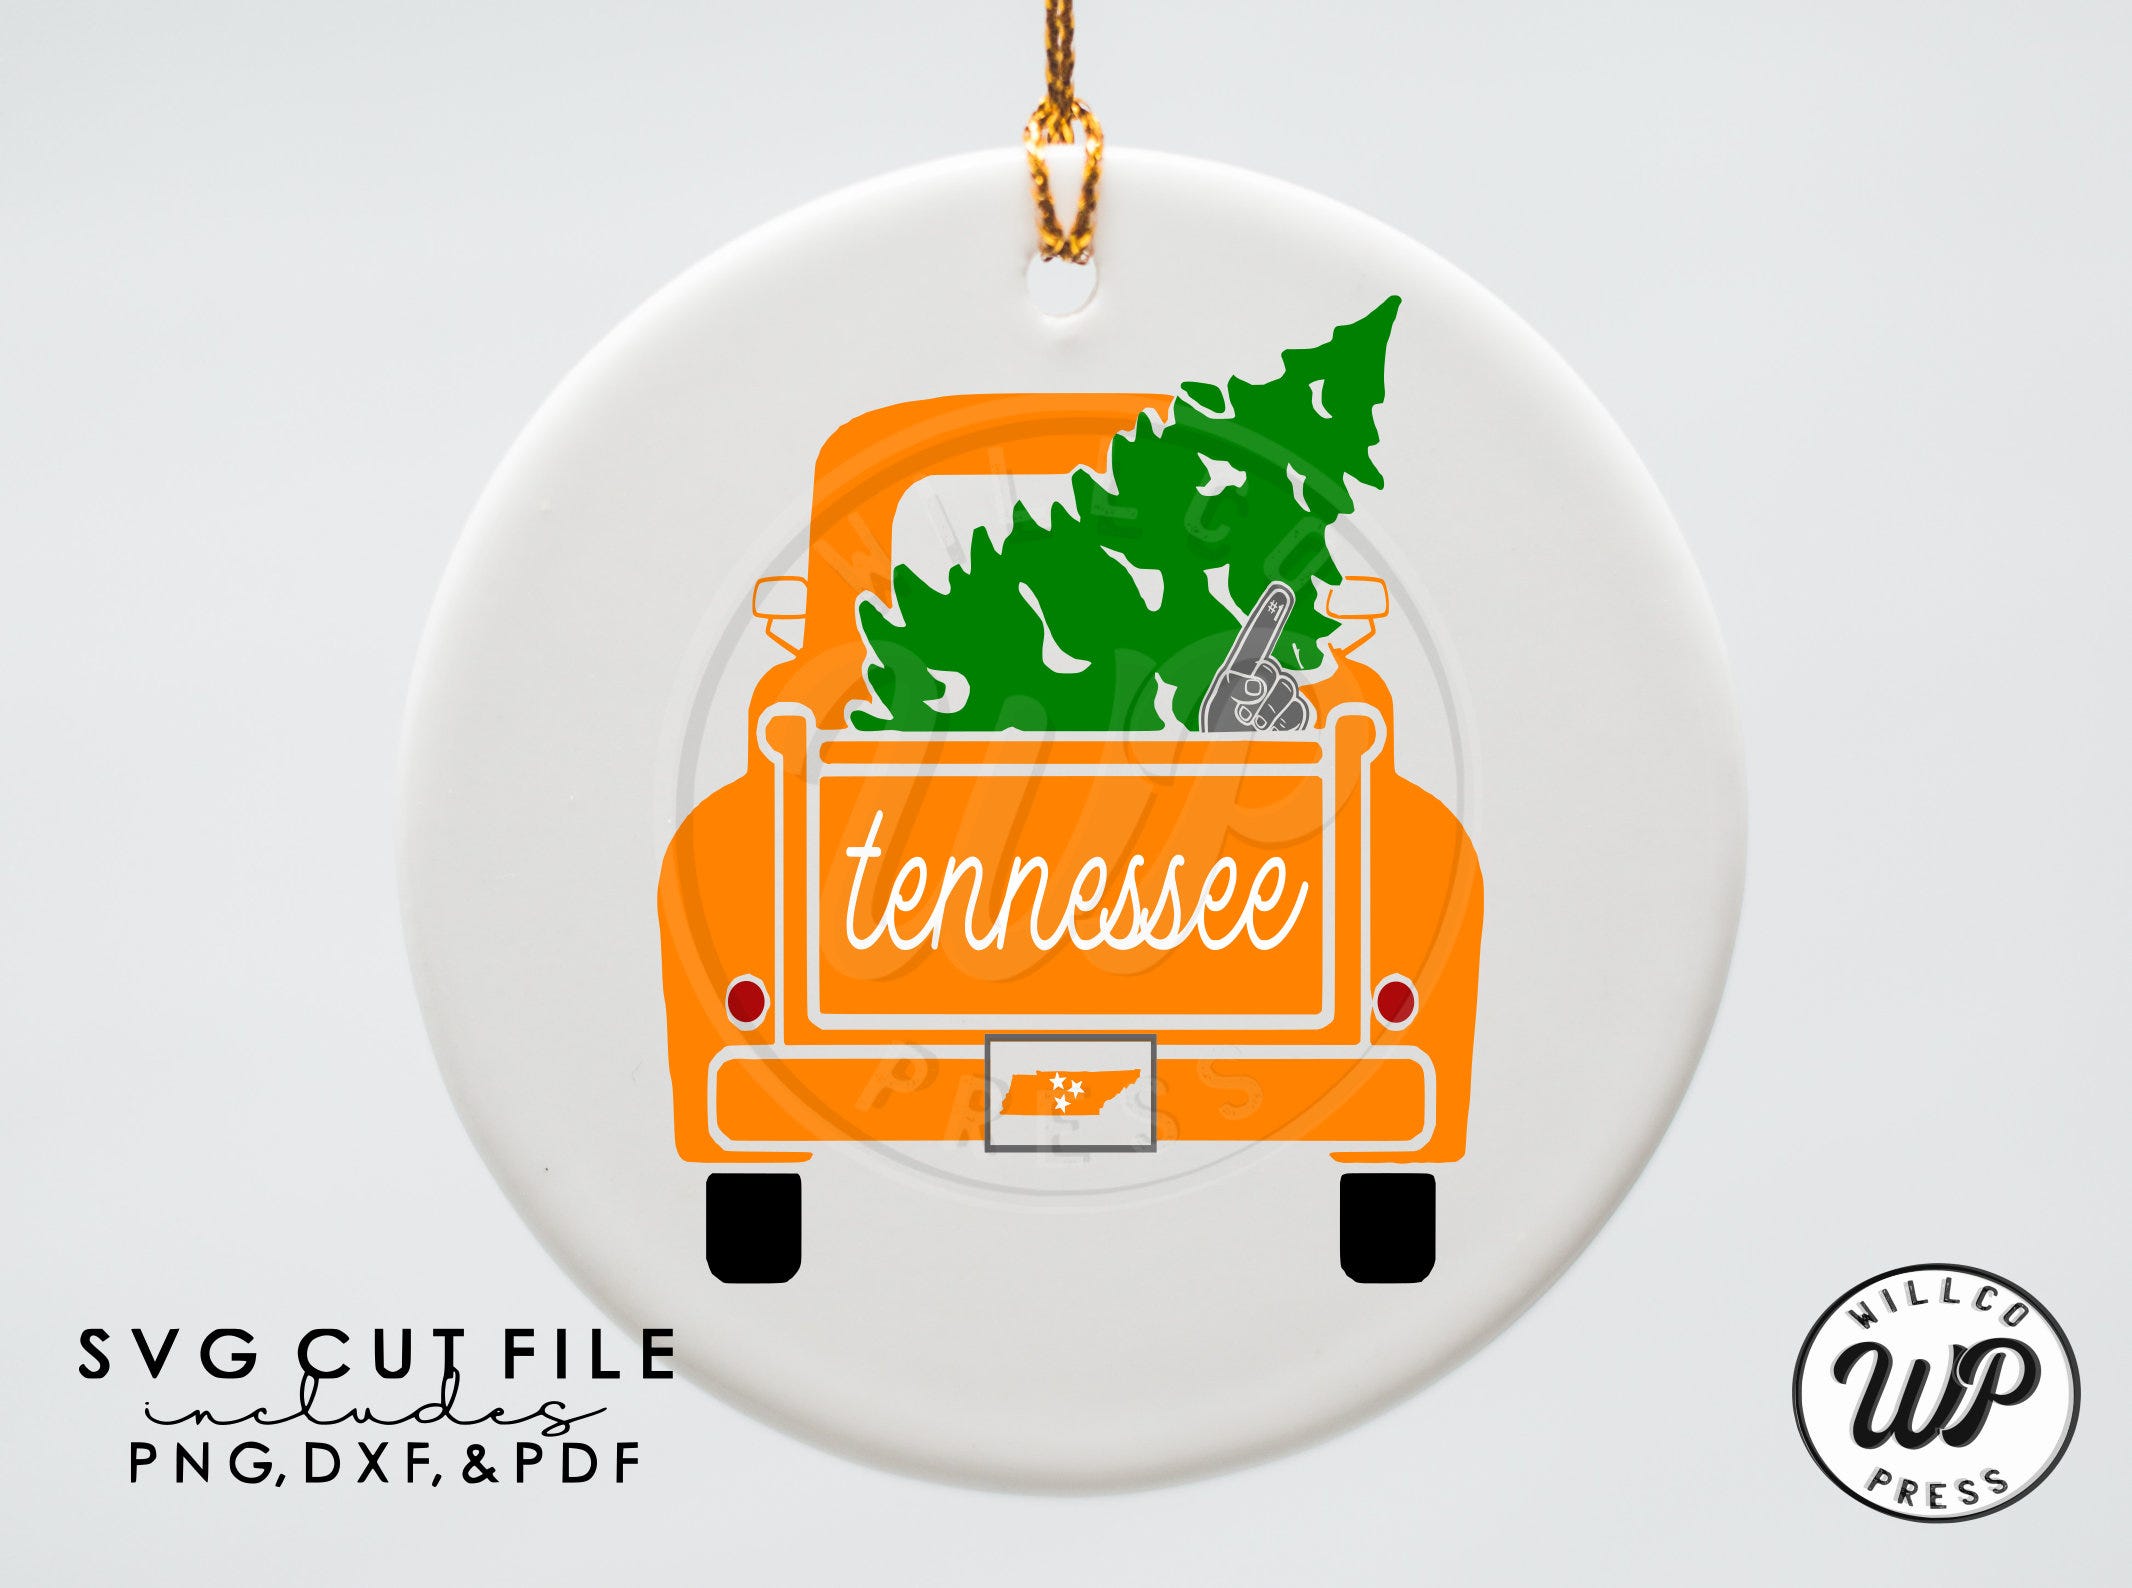 Tennessee Truck svg, Christmas Tree svg, Vintage Pickup Truck, transparent png, dxf, svg files for cricut, sports